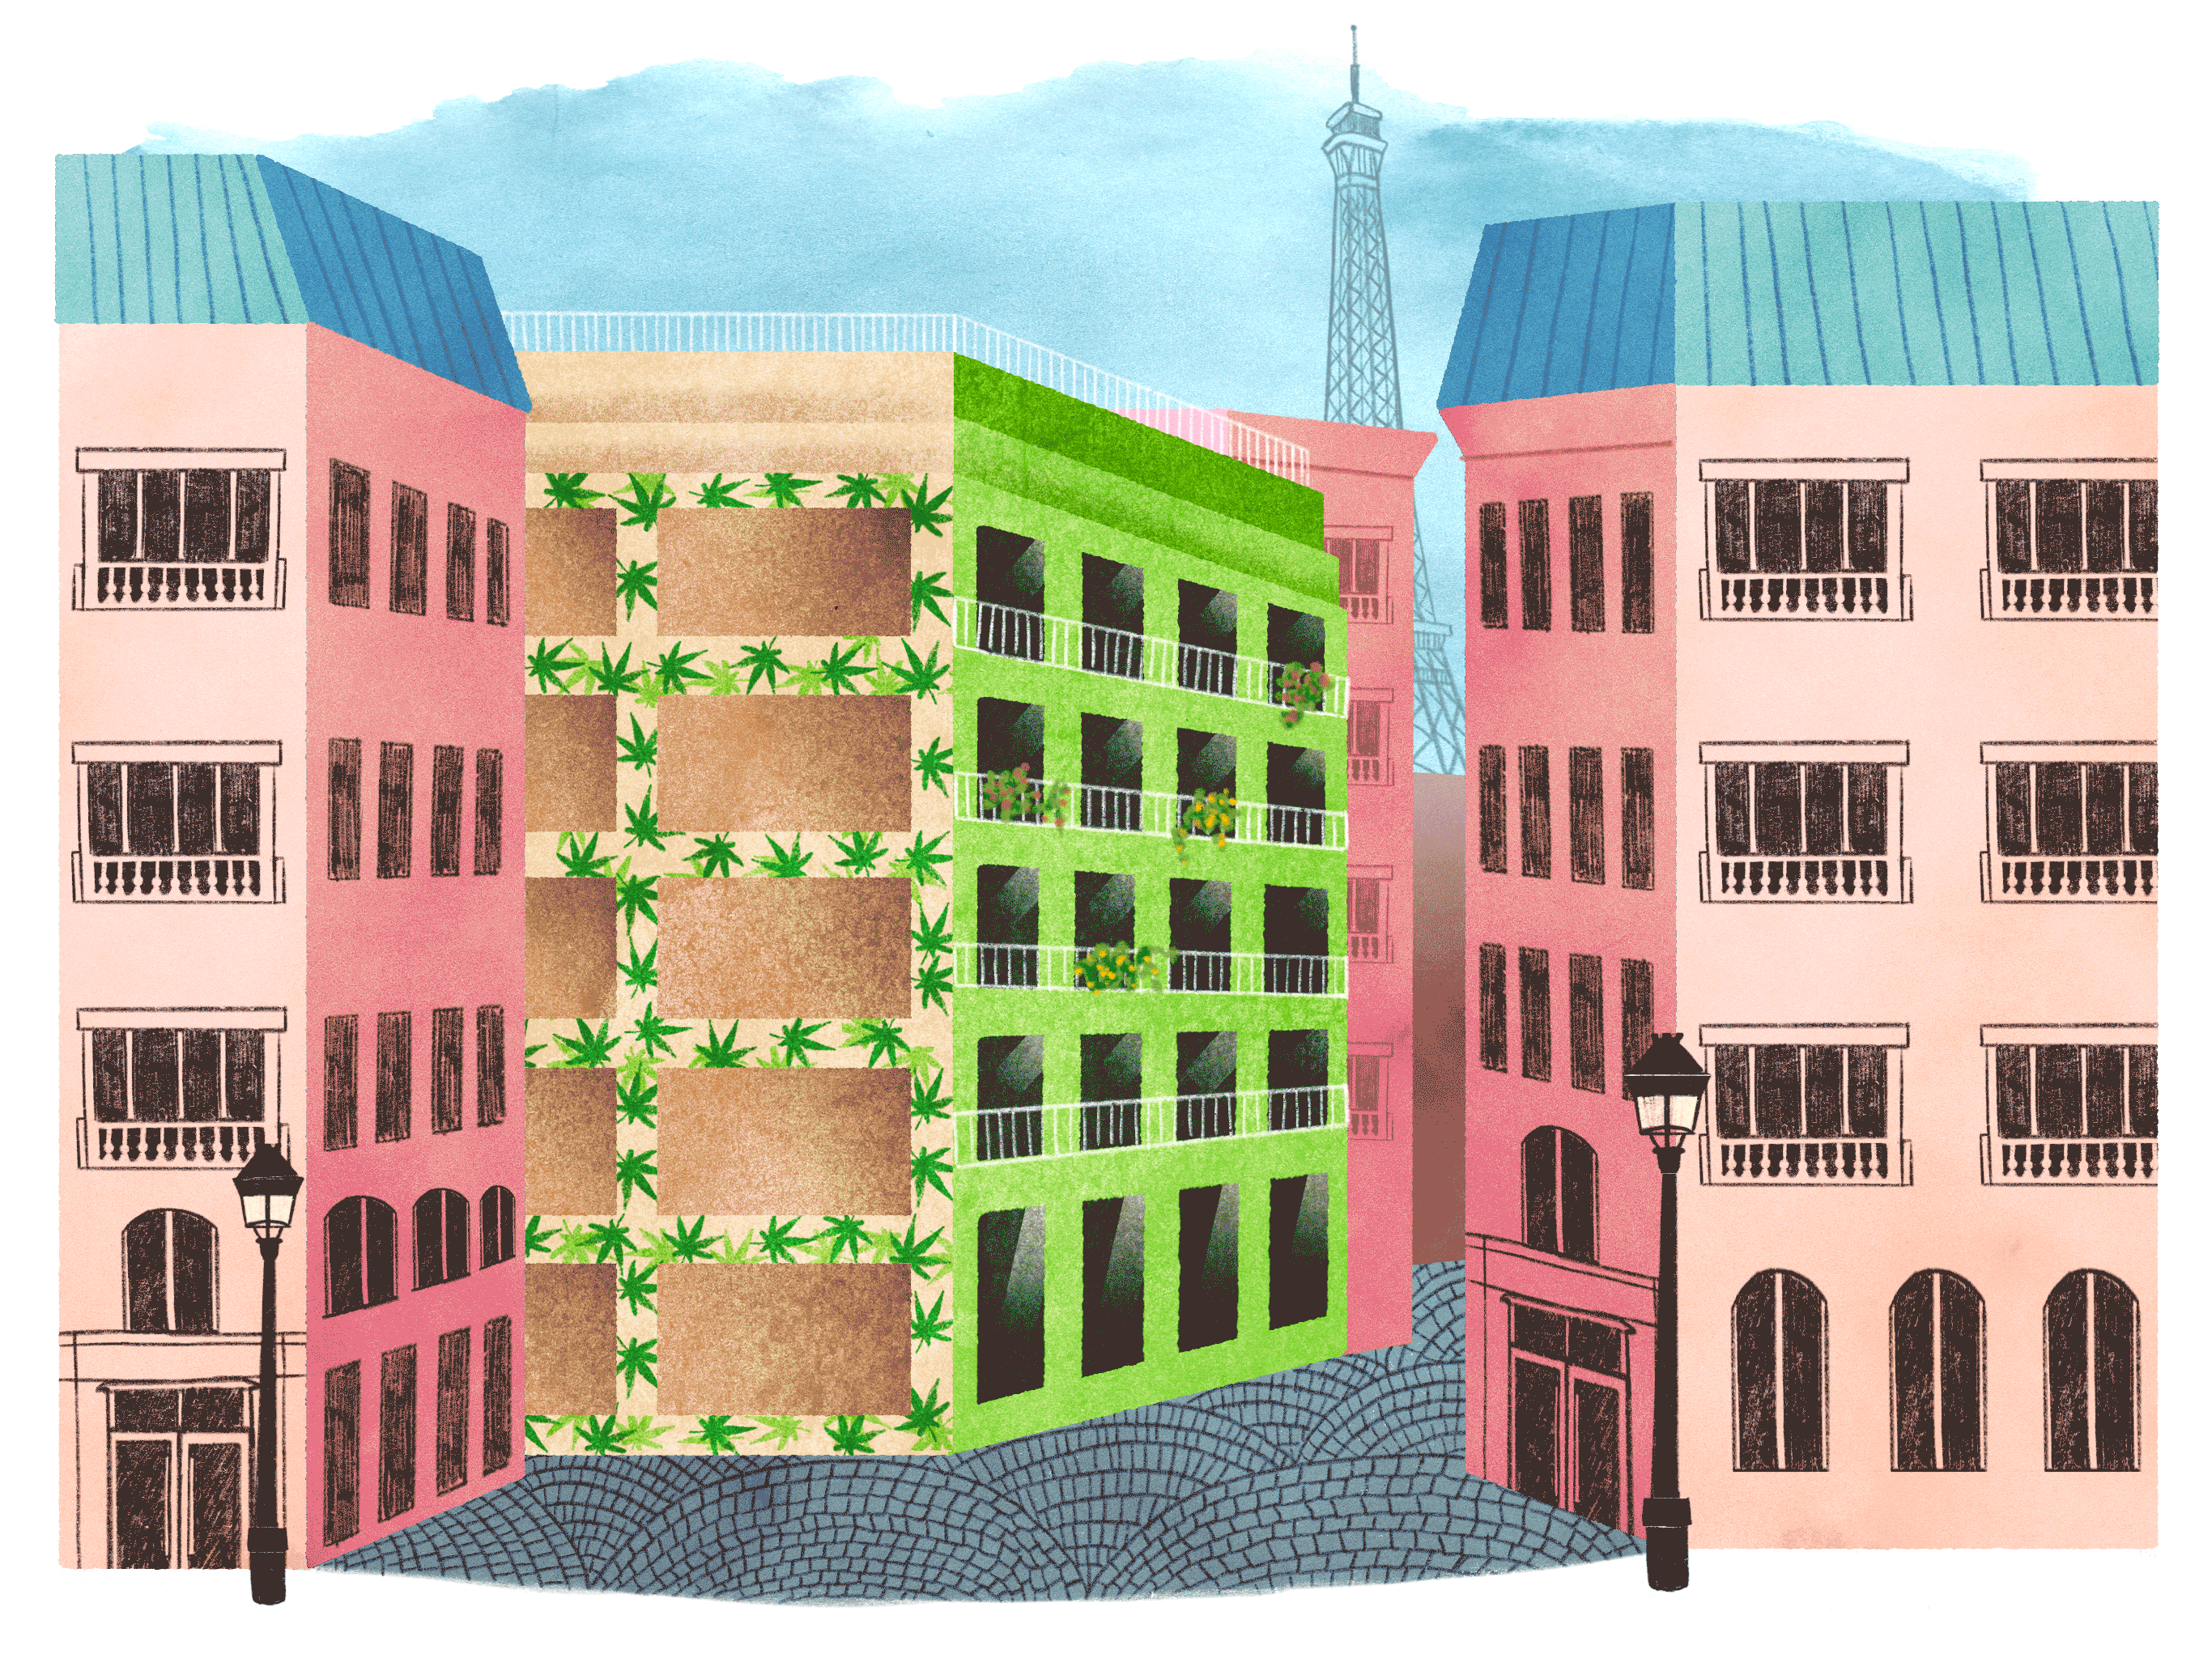 an illustration of a street in Paris with a row of buildings. In the center, the building is slightly green with cannabis leaves on the outside.